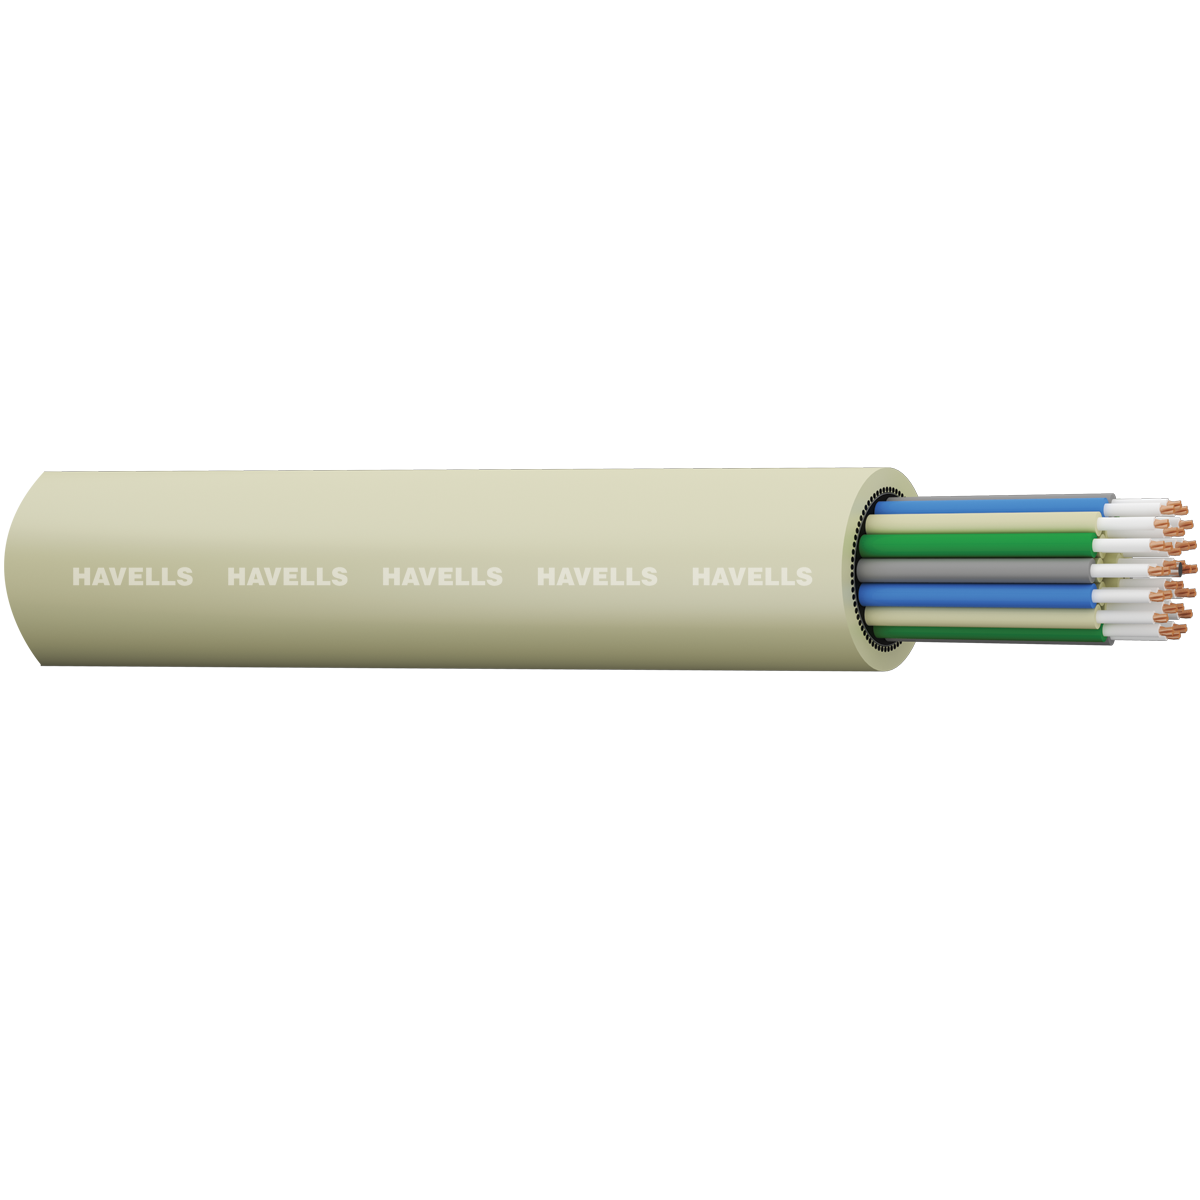 Havells Telecom Switch Board PVC Cables (Pack of 2)